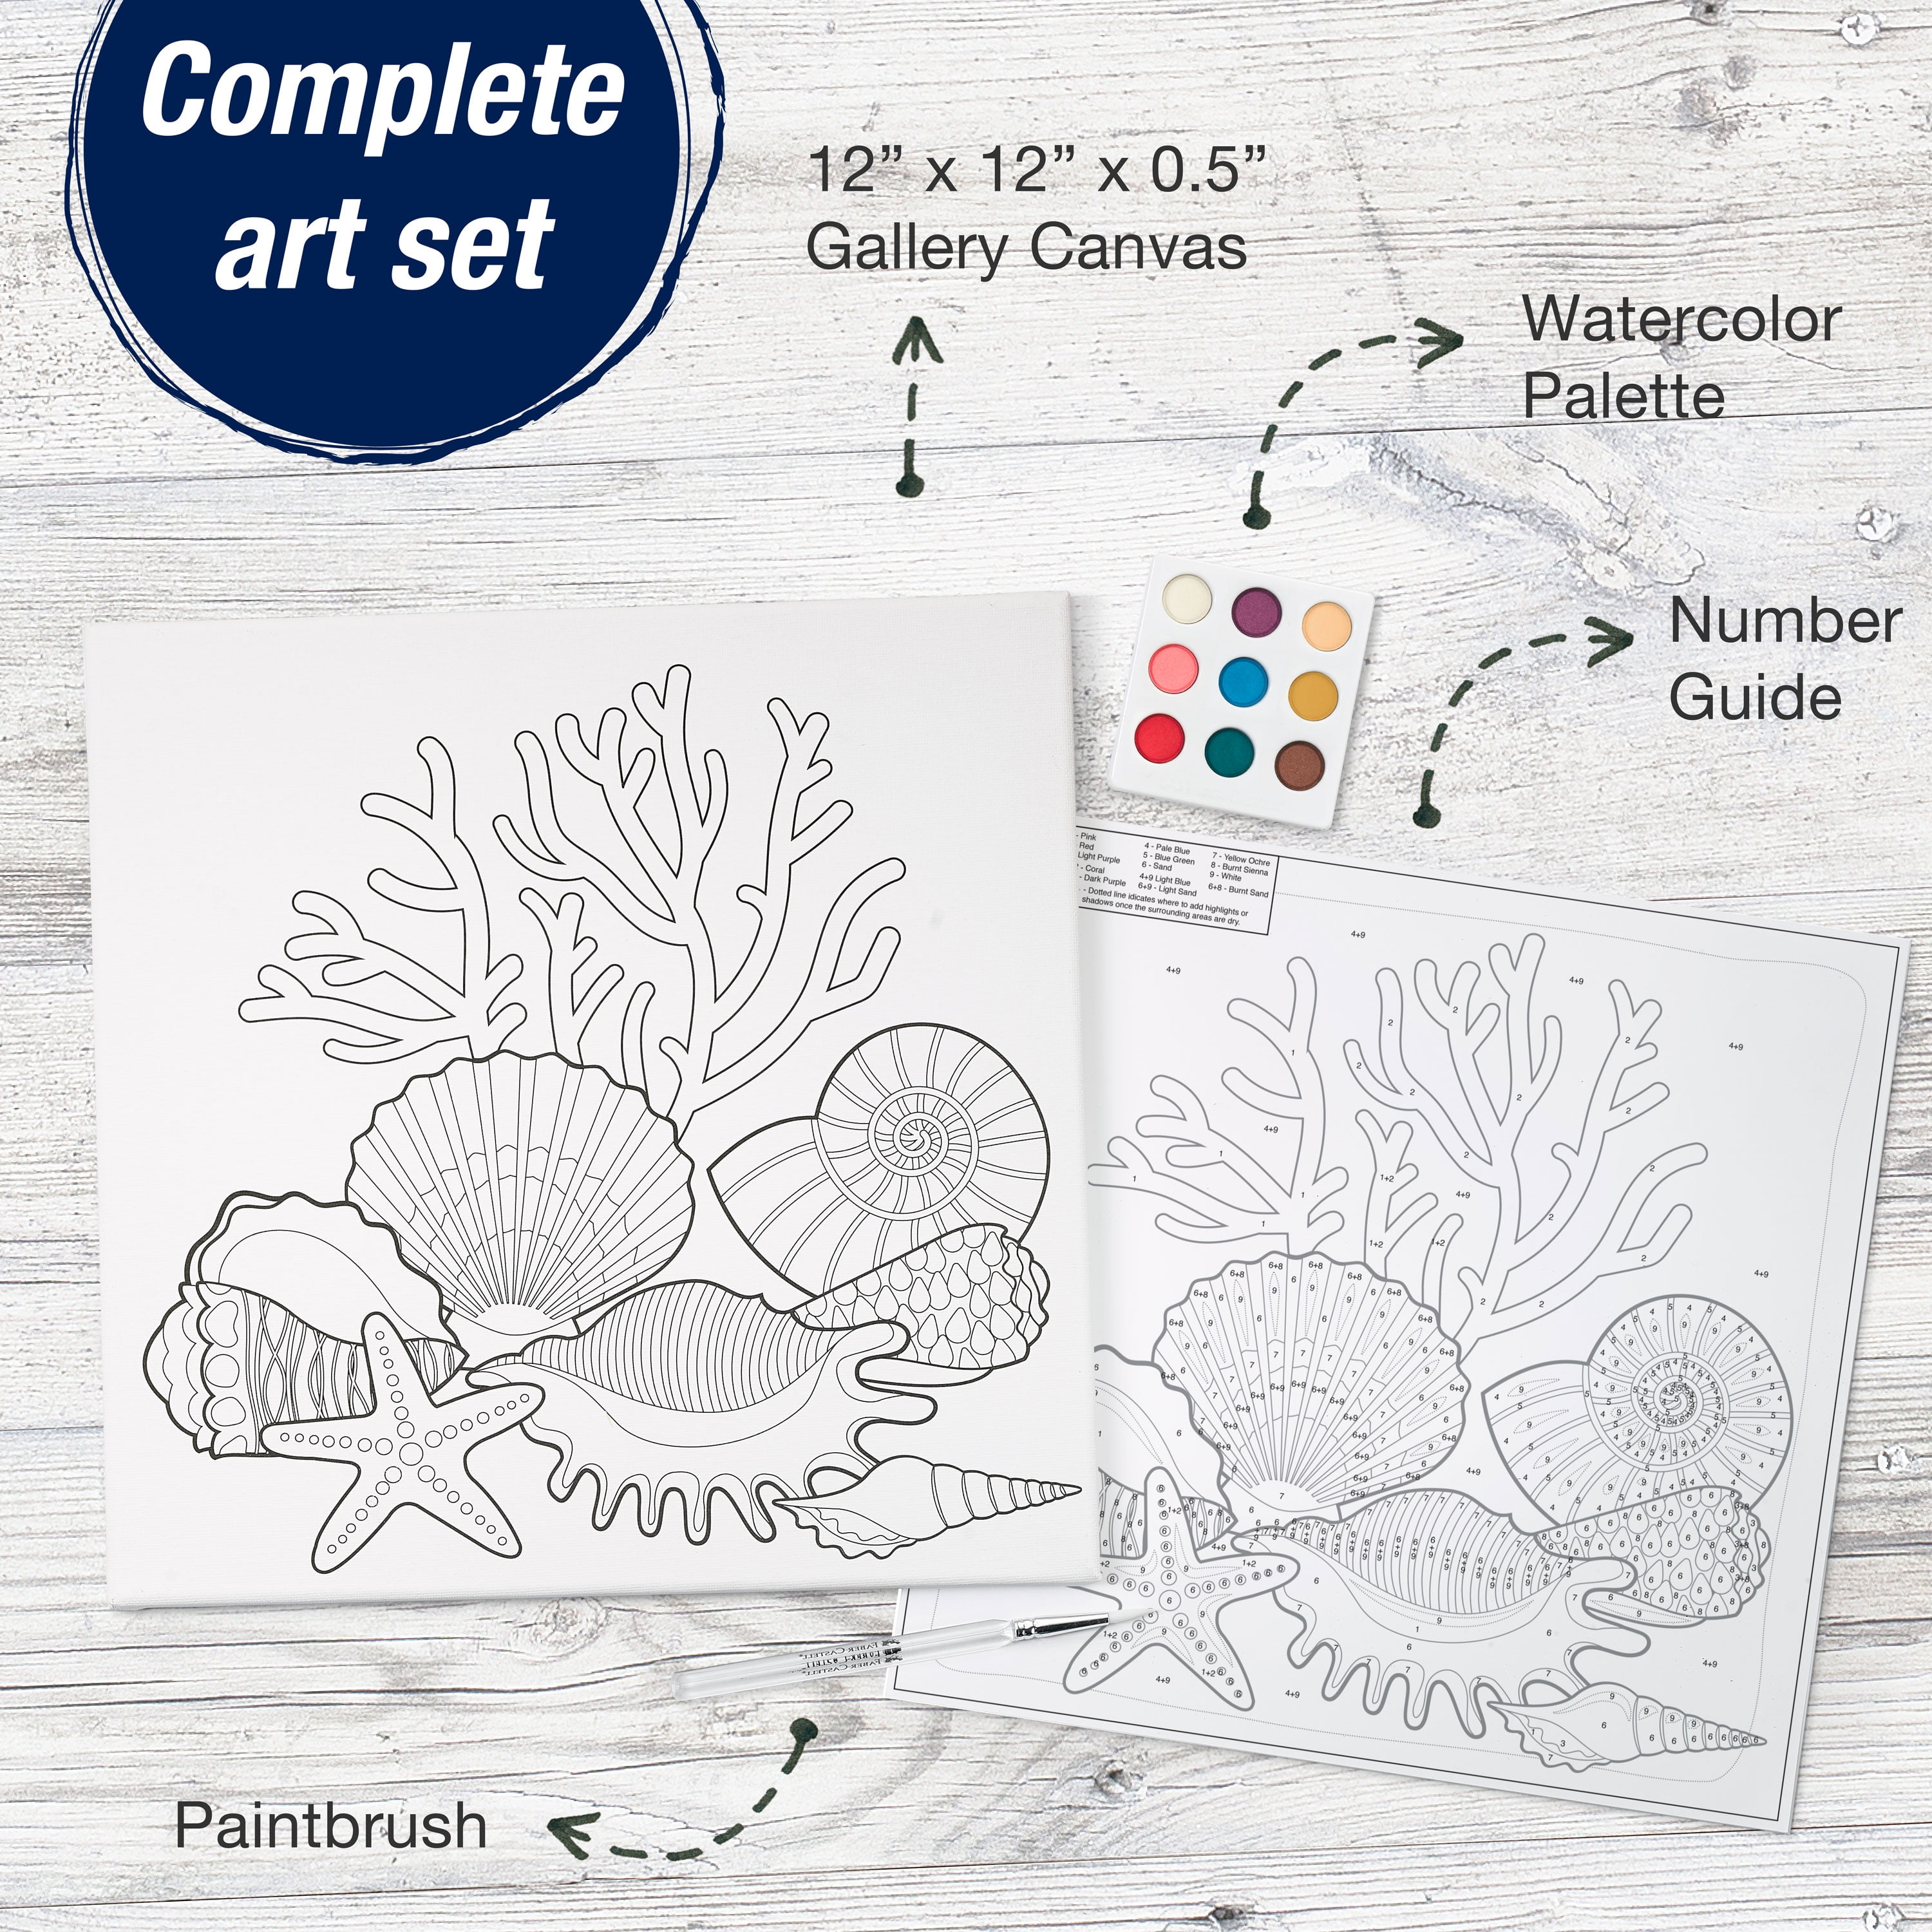 Faber-castell Paint By Number Watercolor Set - Coastal : Target